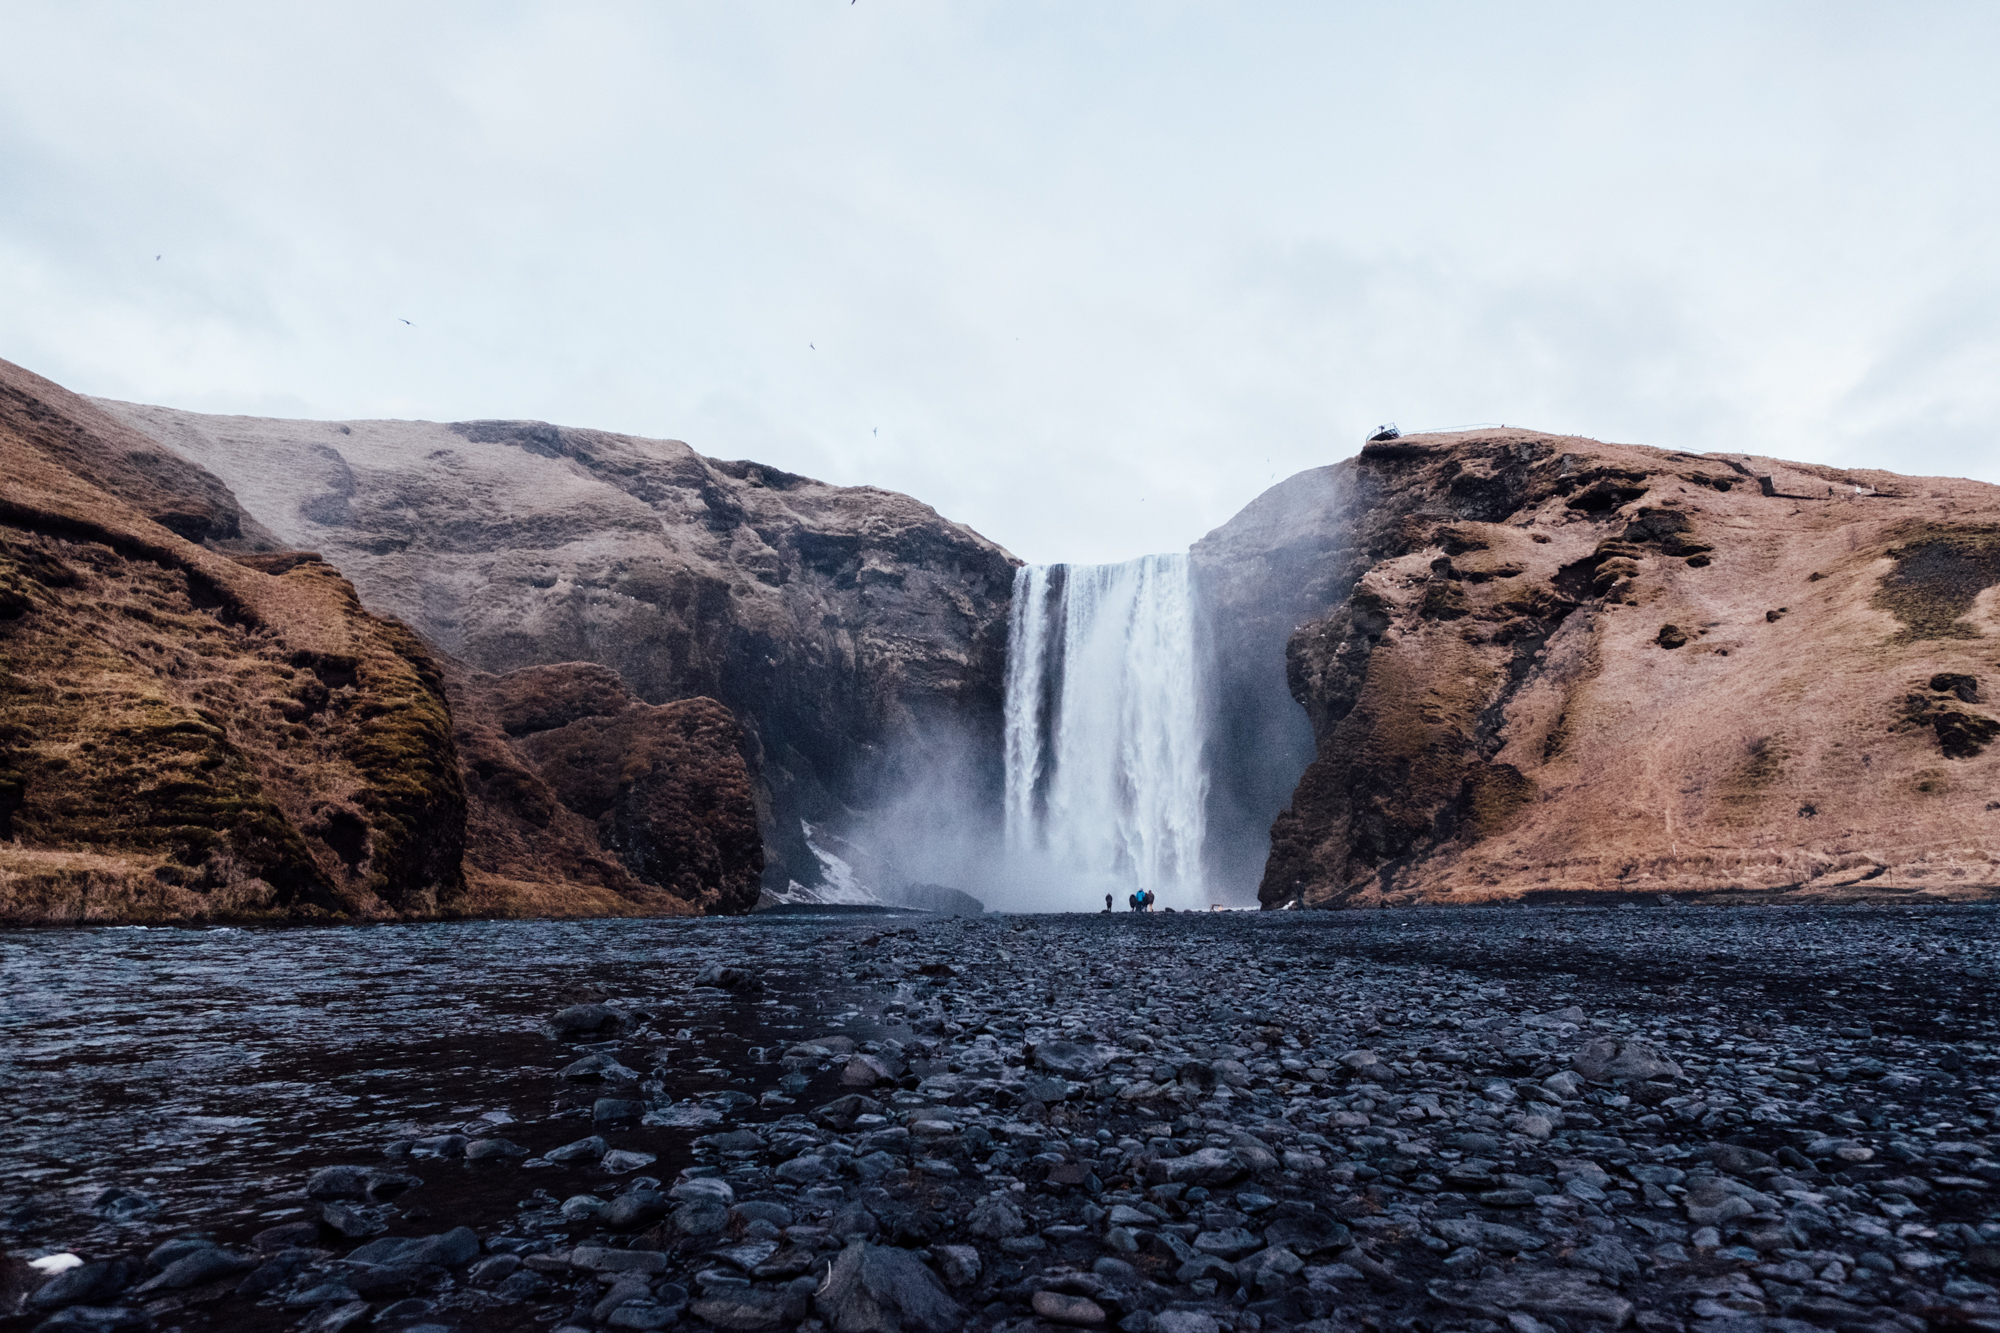  Next stop: Skogafoss! This waterfall is about 200 feet high and also easily accessible from Ring Road. Sadly we got here right after the sun set, so we didn’t get too much time to check it out before it got dark.  